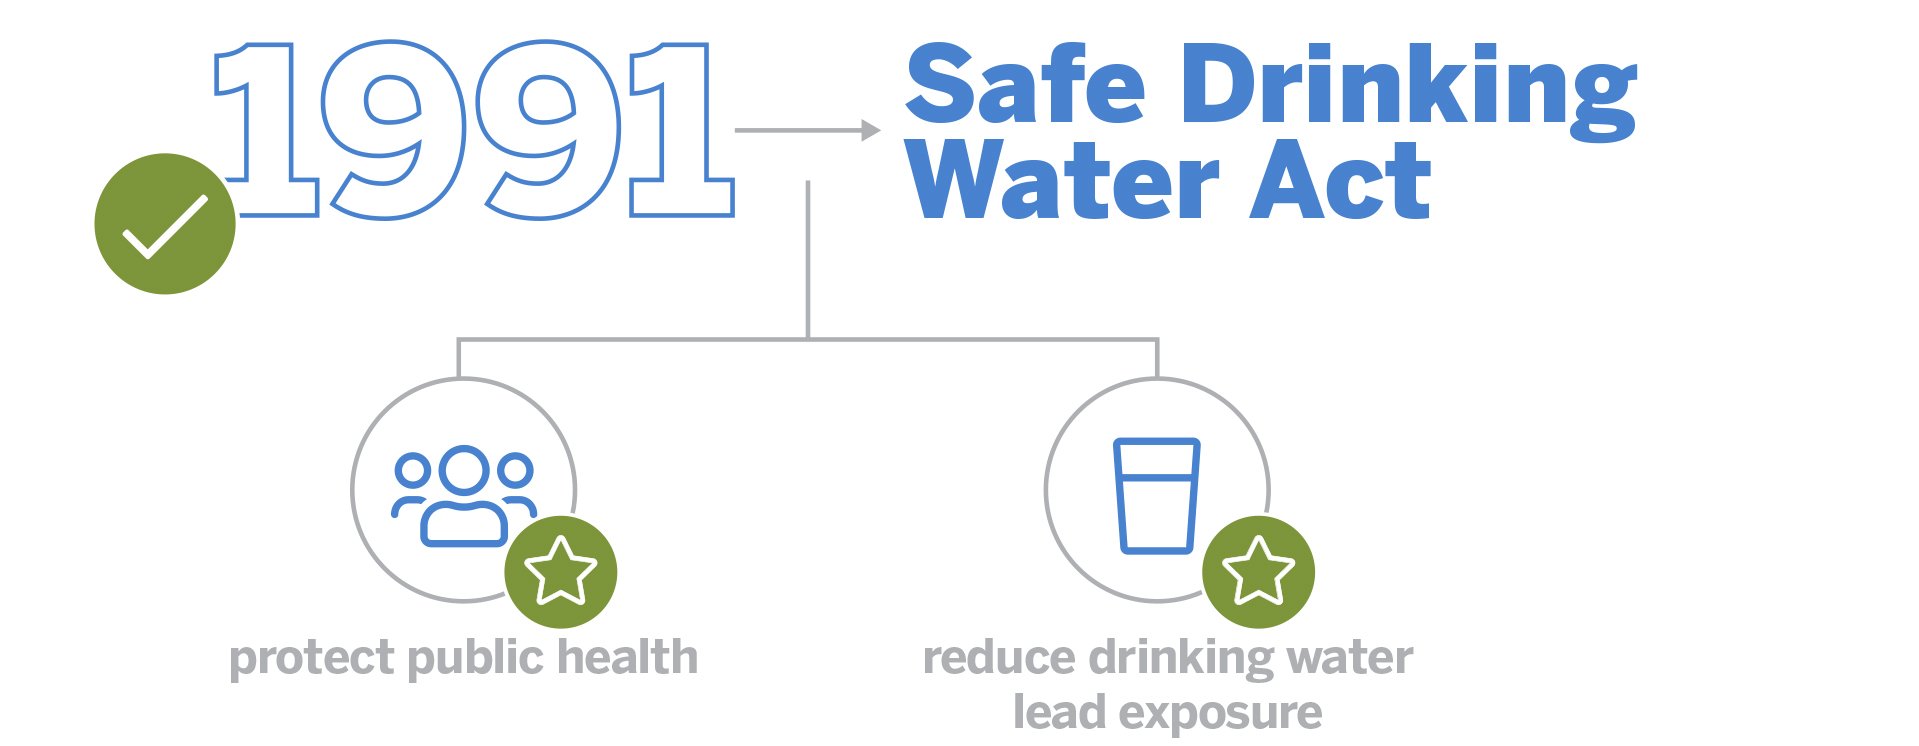 Infographic showing that in 1991 as part of the Safe Drinking Water Act (SDWA), EPA’s primary objective with the LCR is to protect public health and reduce exposure to lead in drinking water.